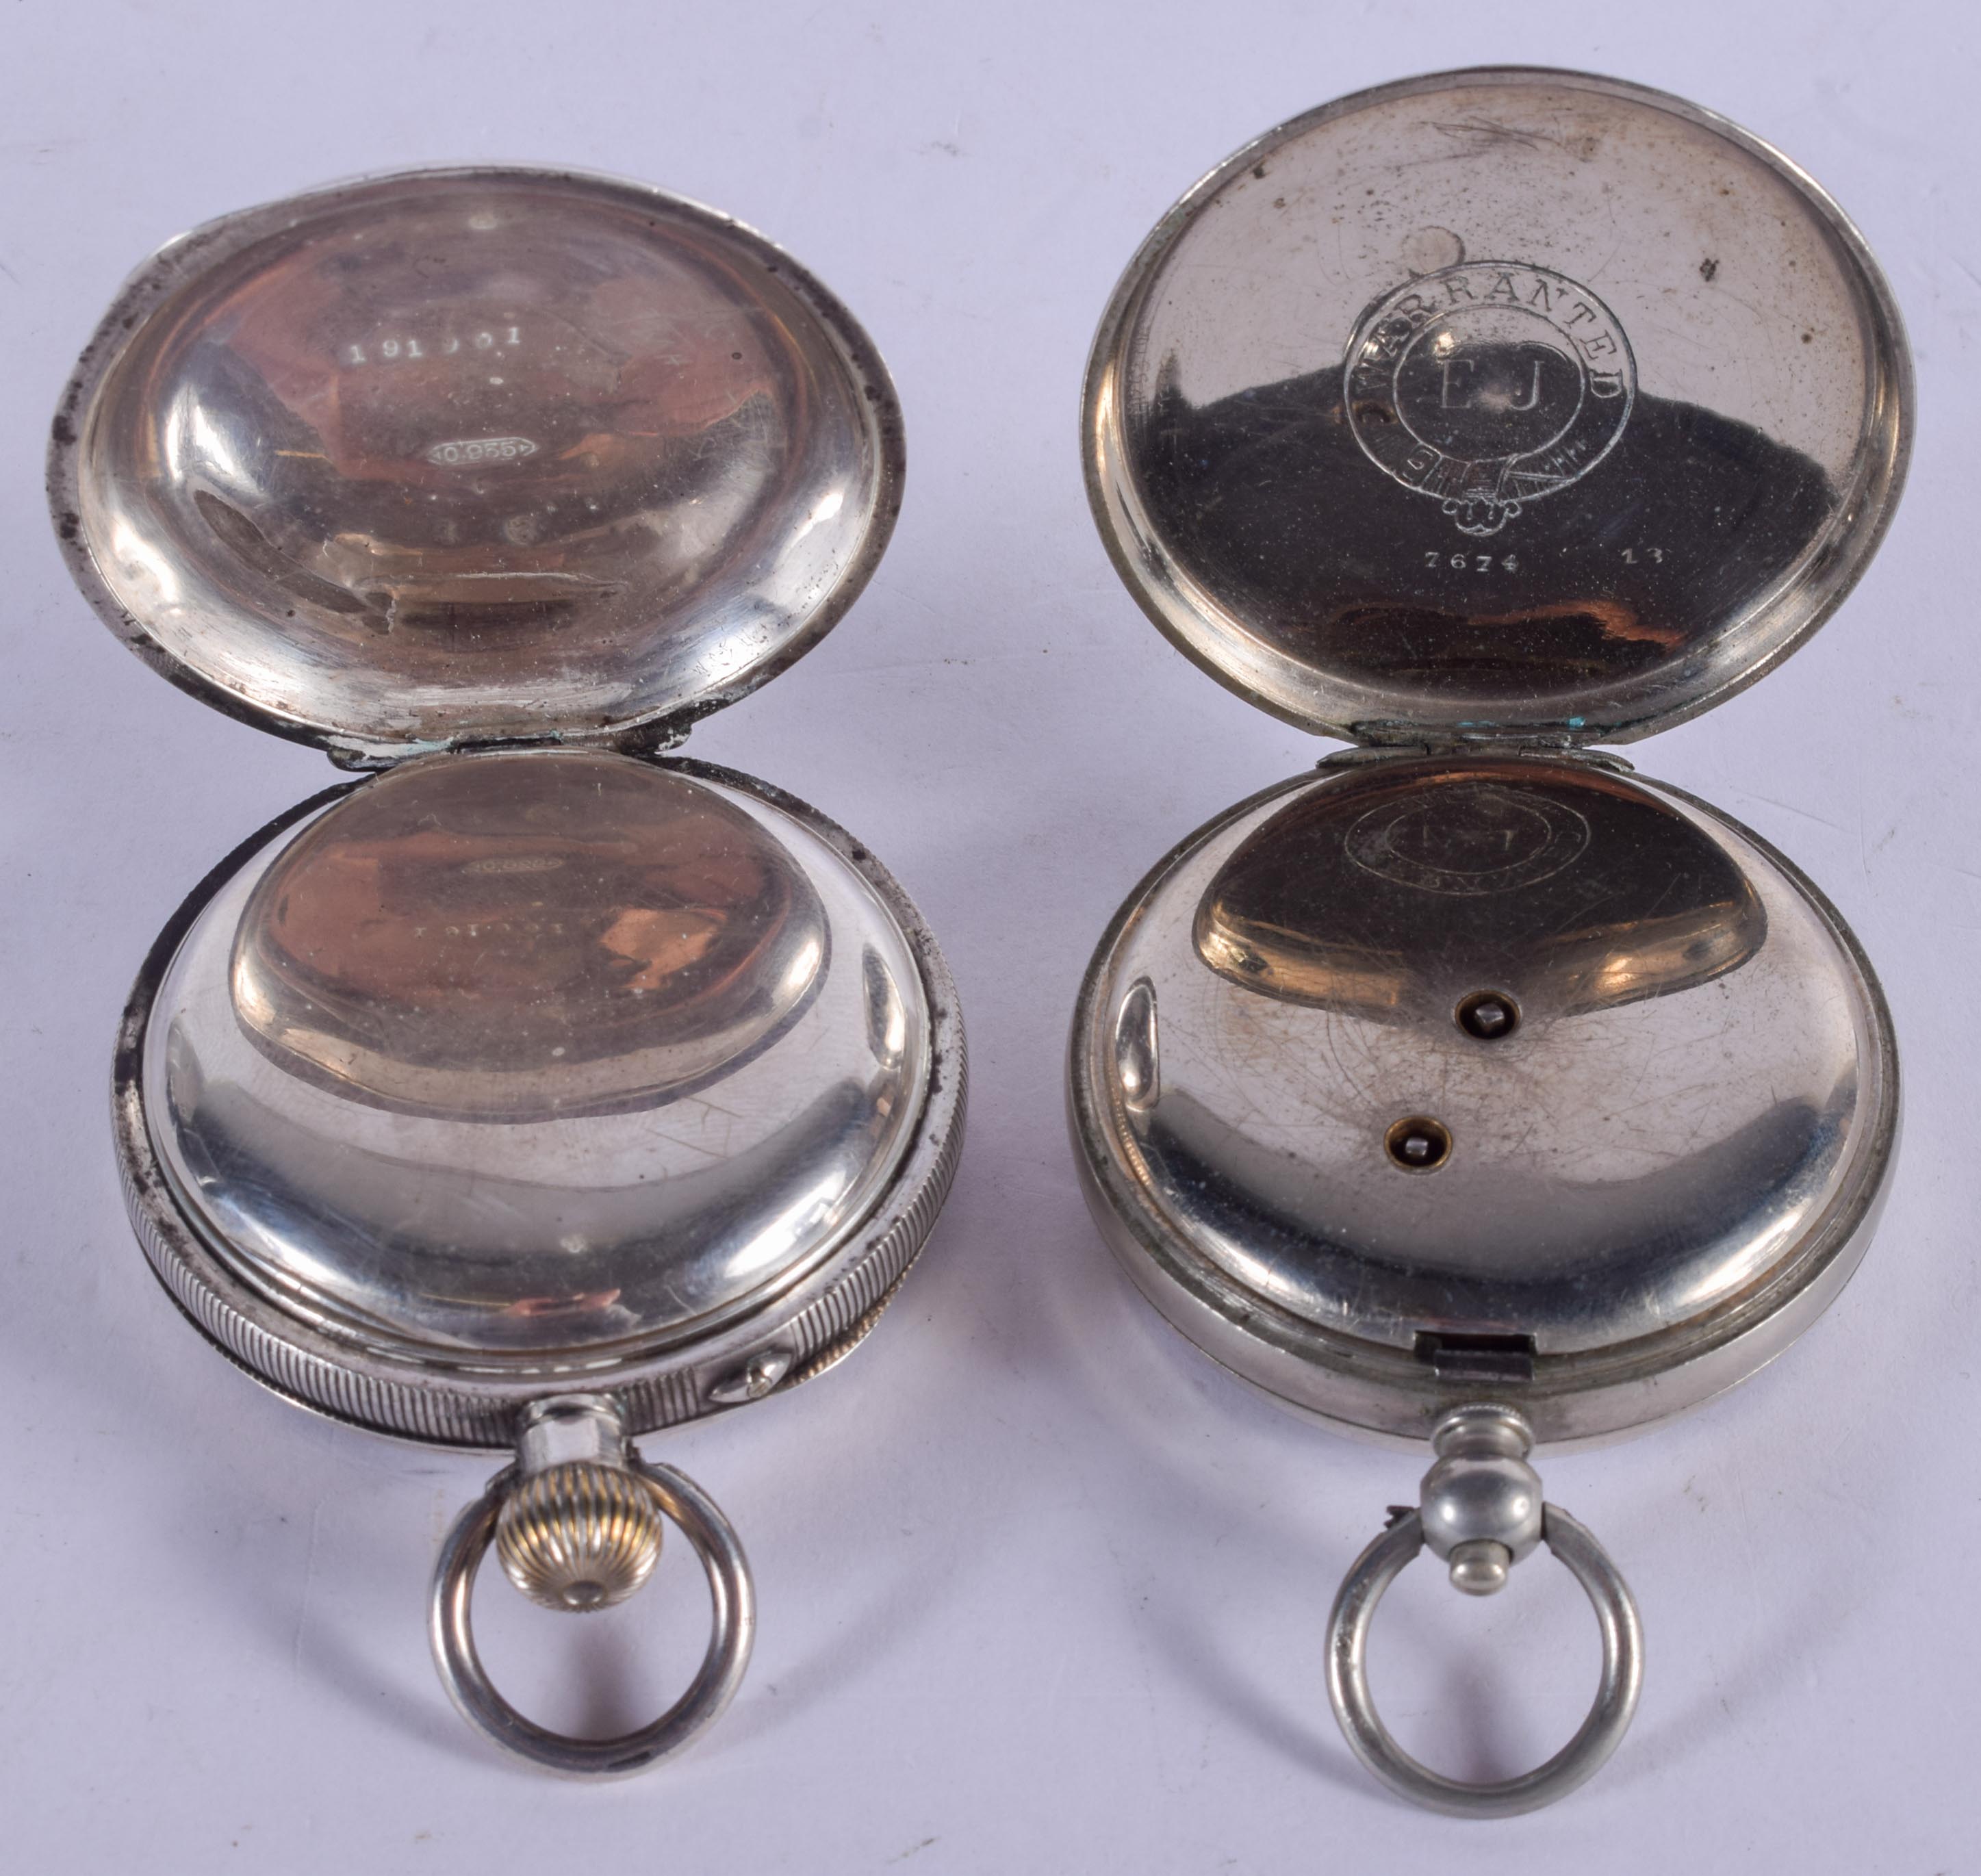 AN ANTIQUE SILVER POCKET WATCH and another plated watch. Largest 5.25 cm diameter. (2) - Image 3 of 5